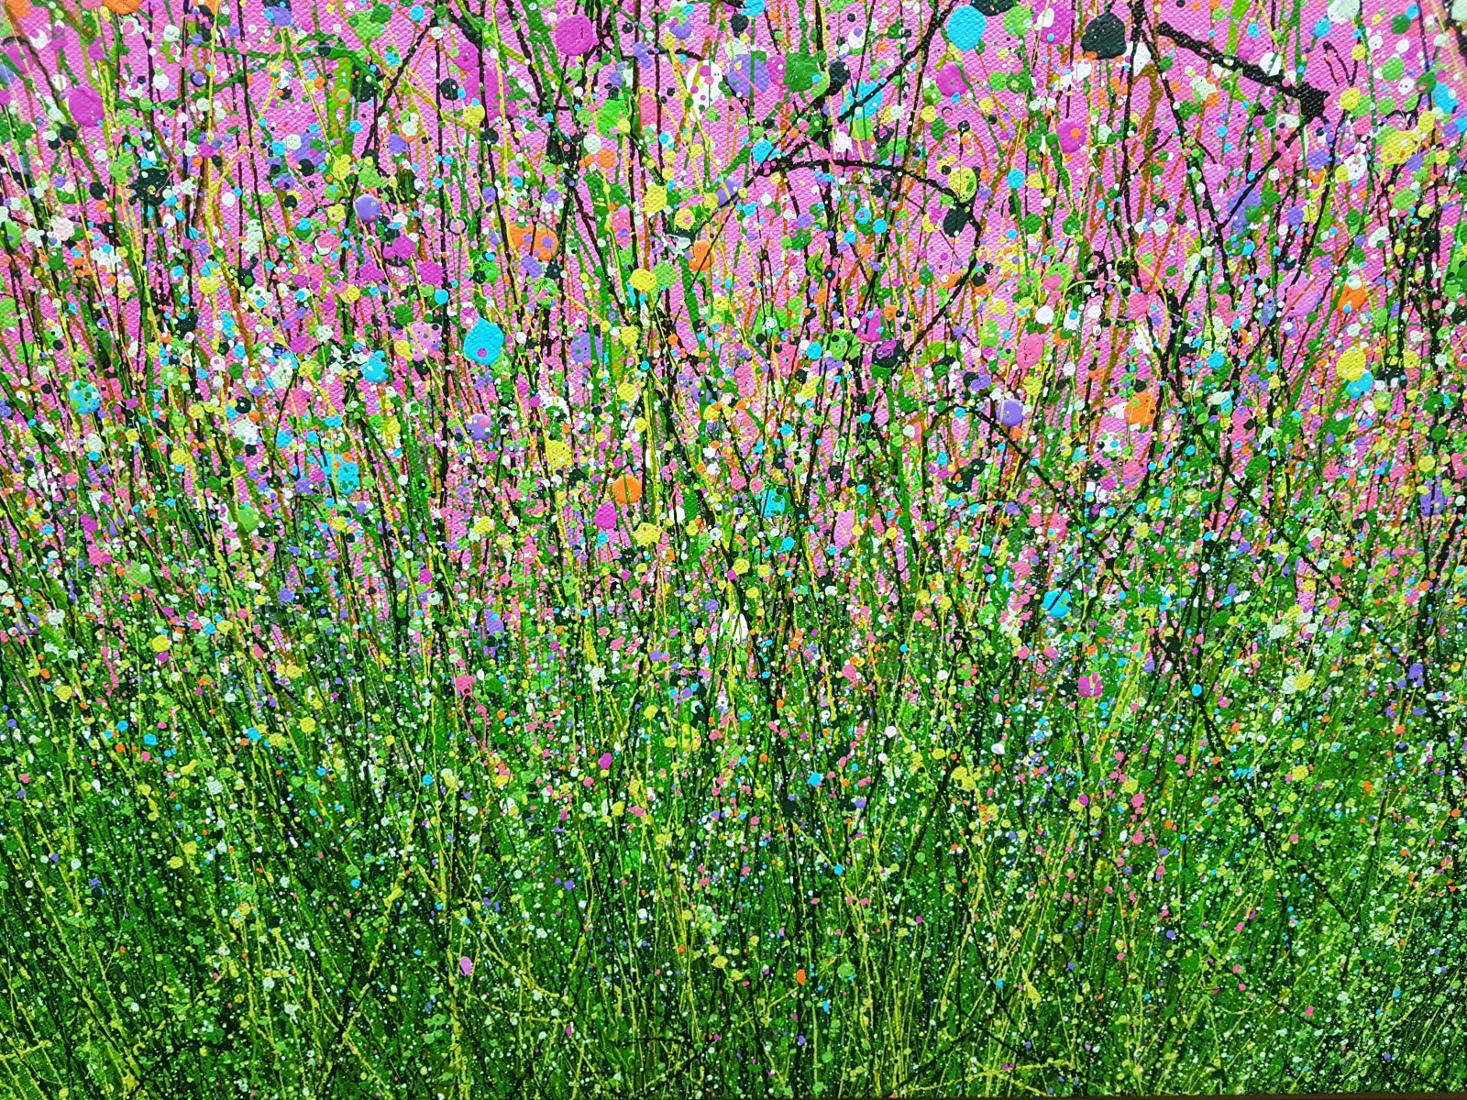 Flamingo Sky Meadows - Impressionist Painting by Lucy Moore